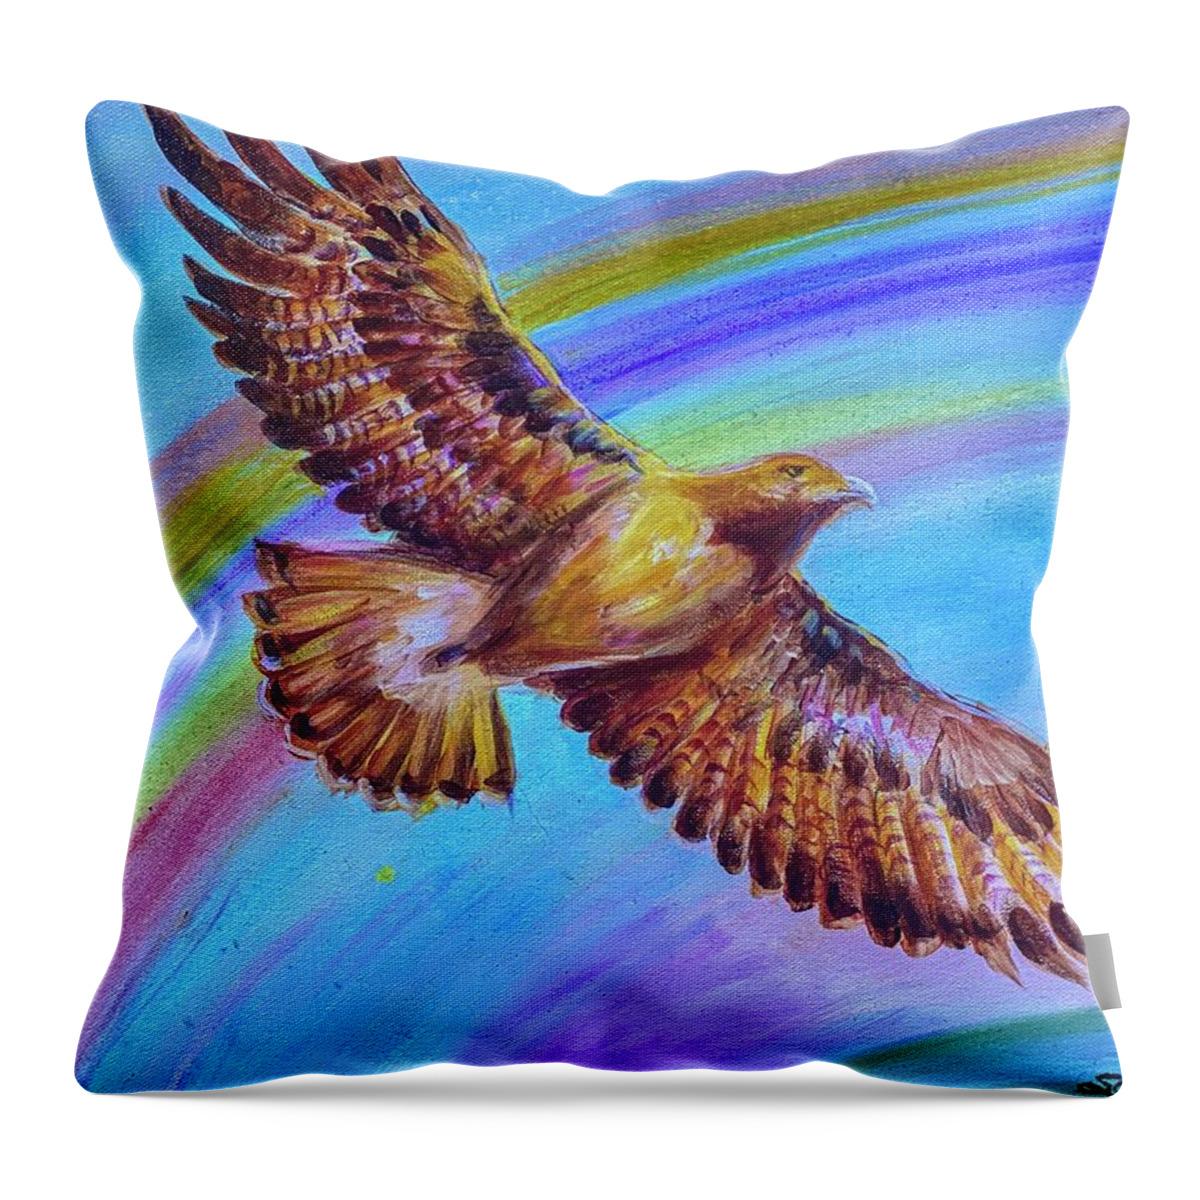 Masks Throw Pillow featuring the painting Hawk's View by Sofanya White